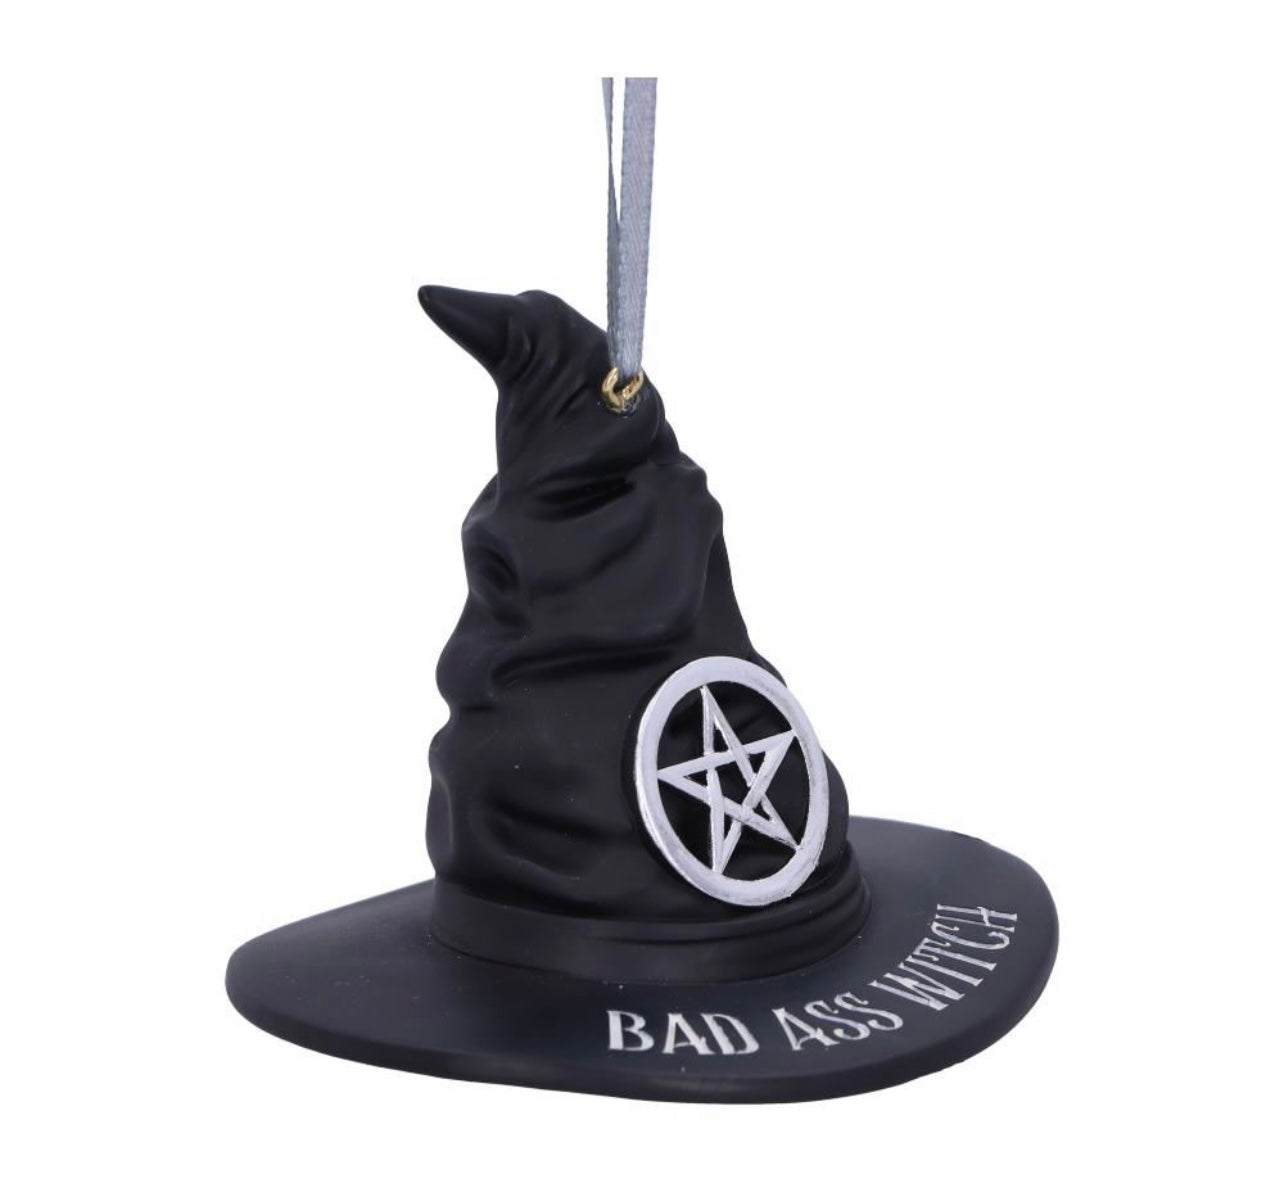 Bad ass witch hat hanging ornament